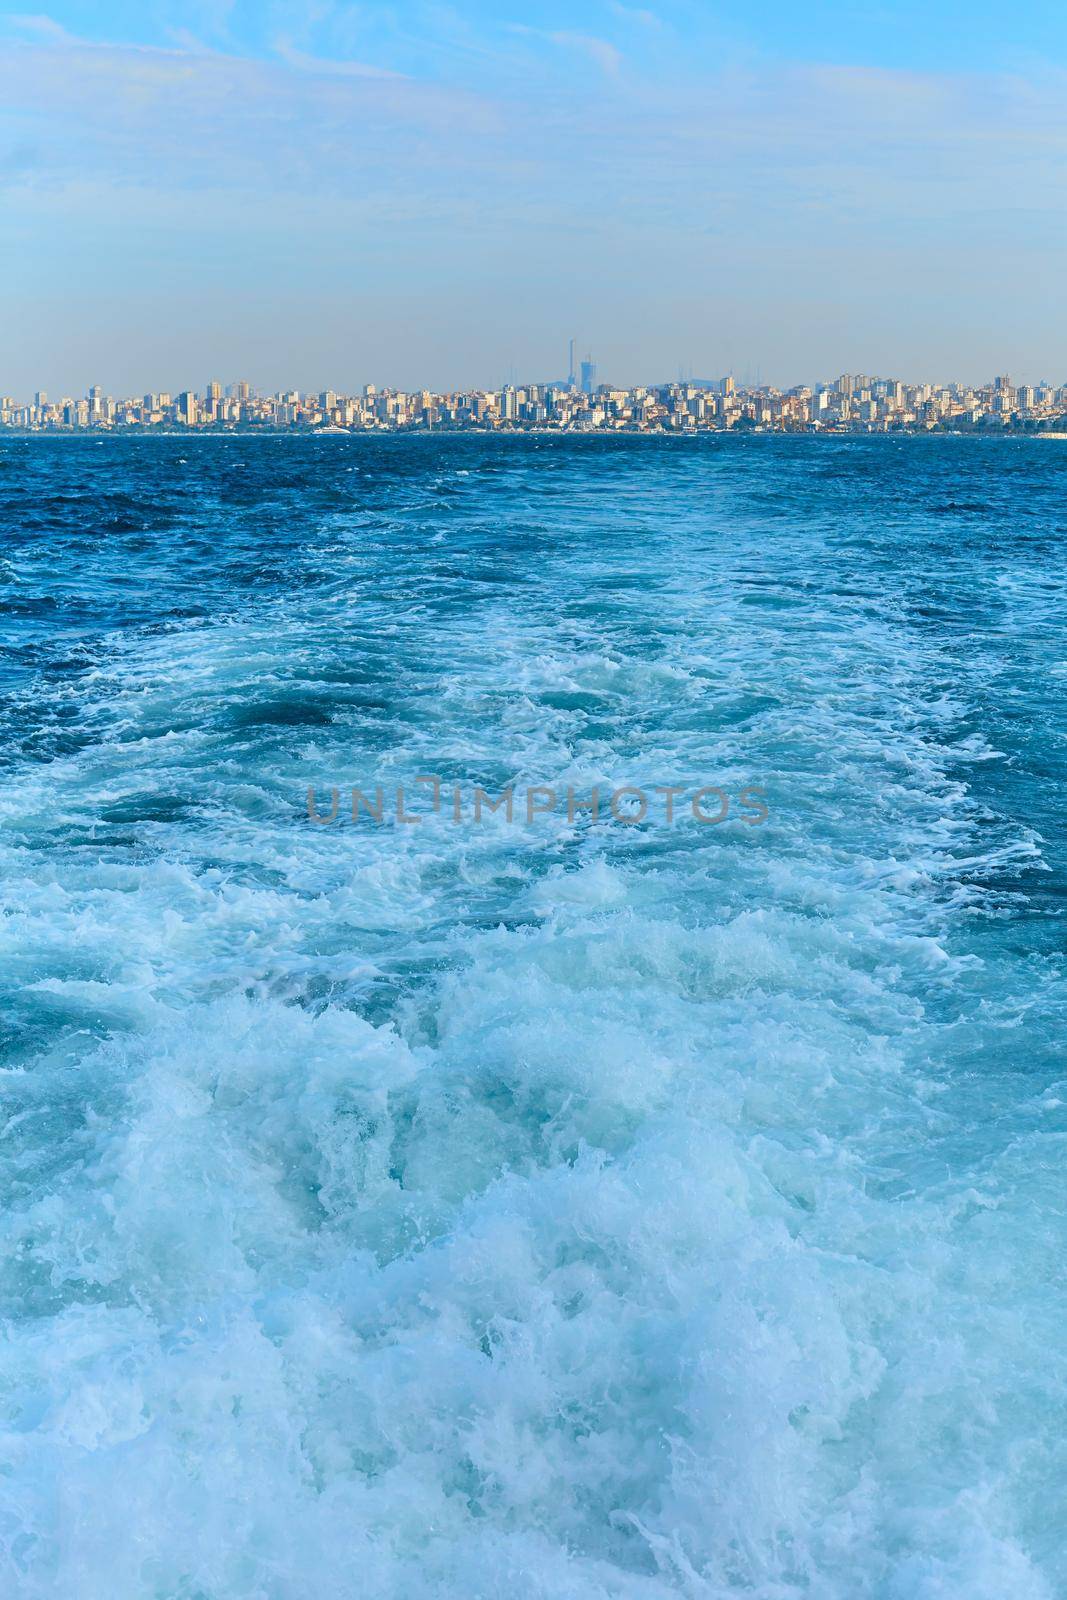 A boat trip on the Bosphorus, a view of the waves from the boat.